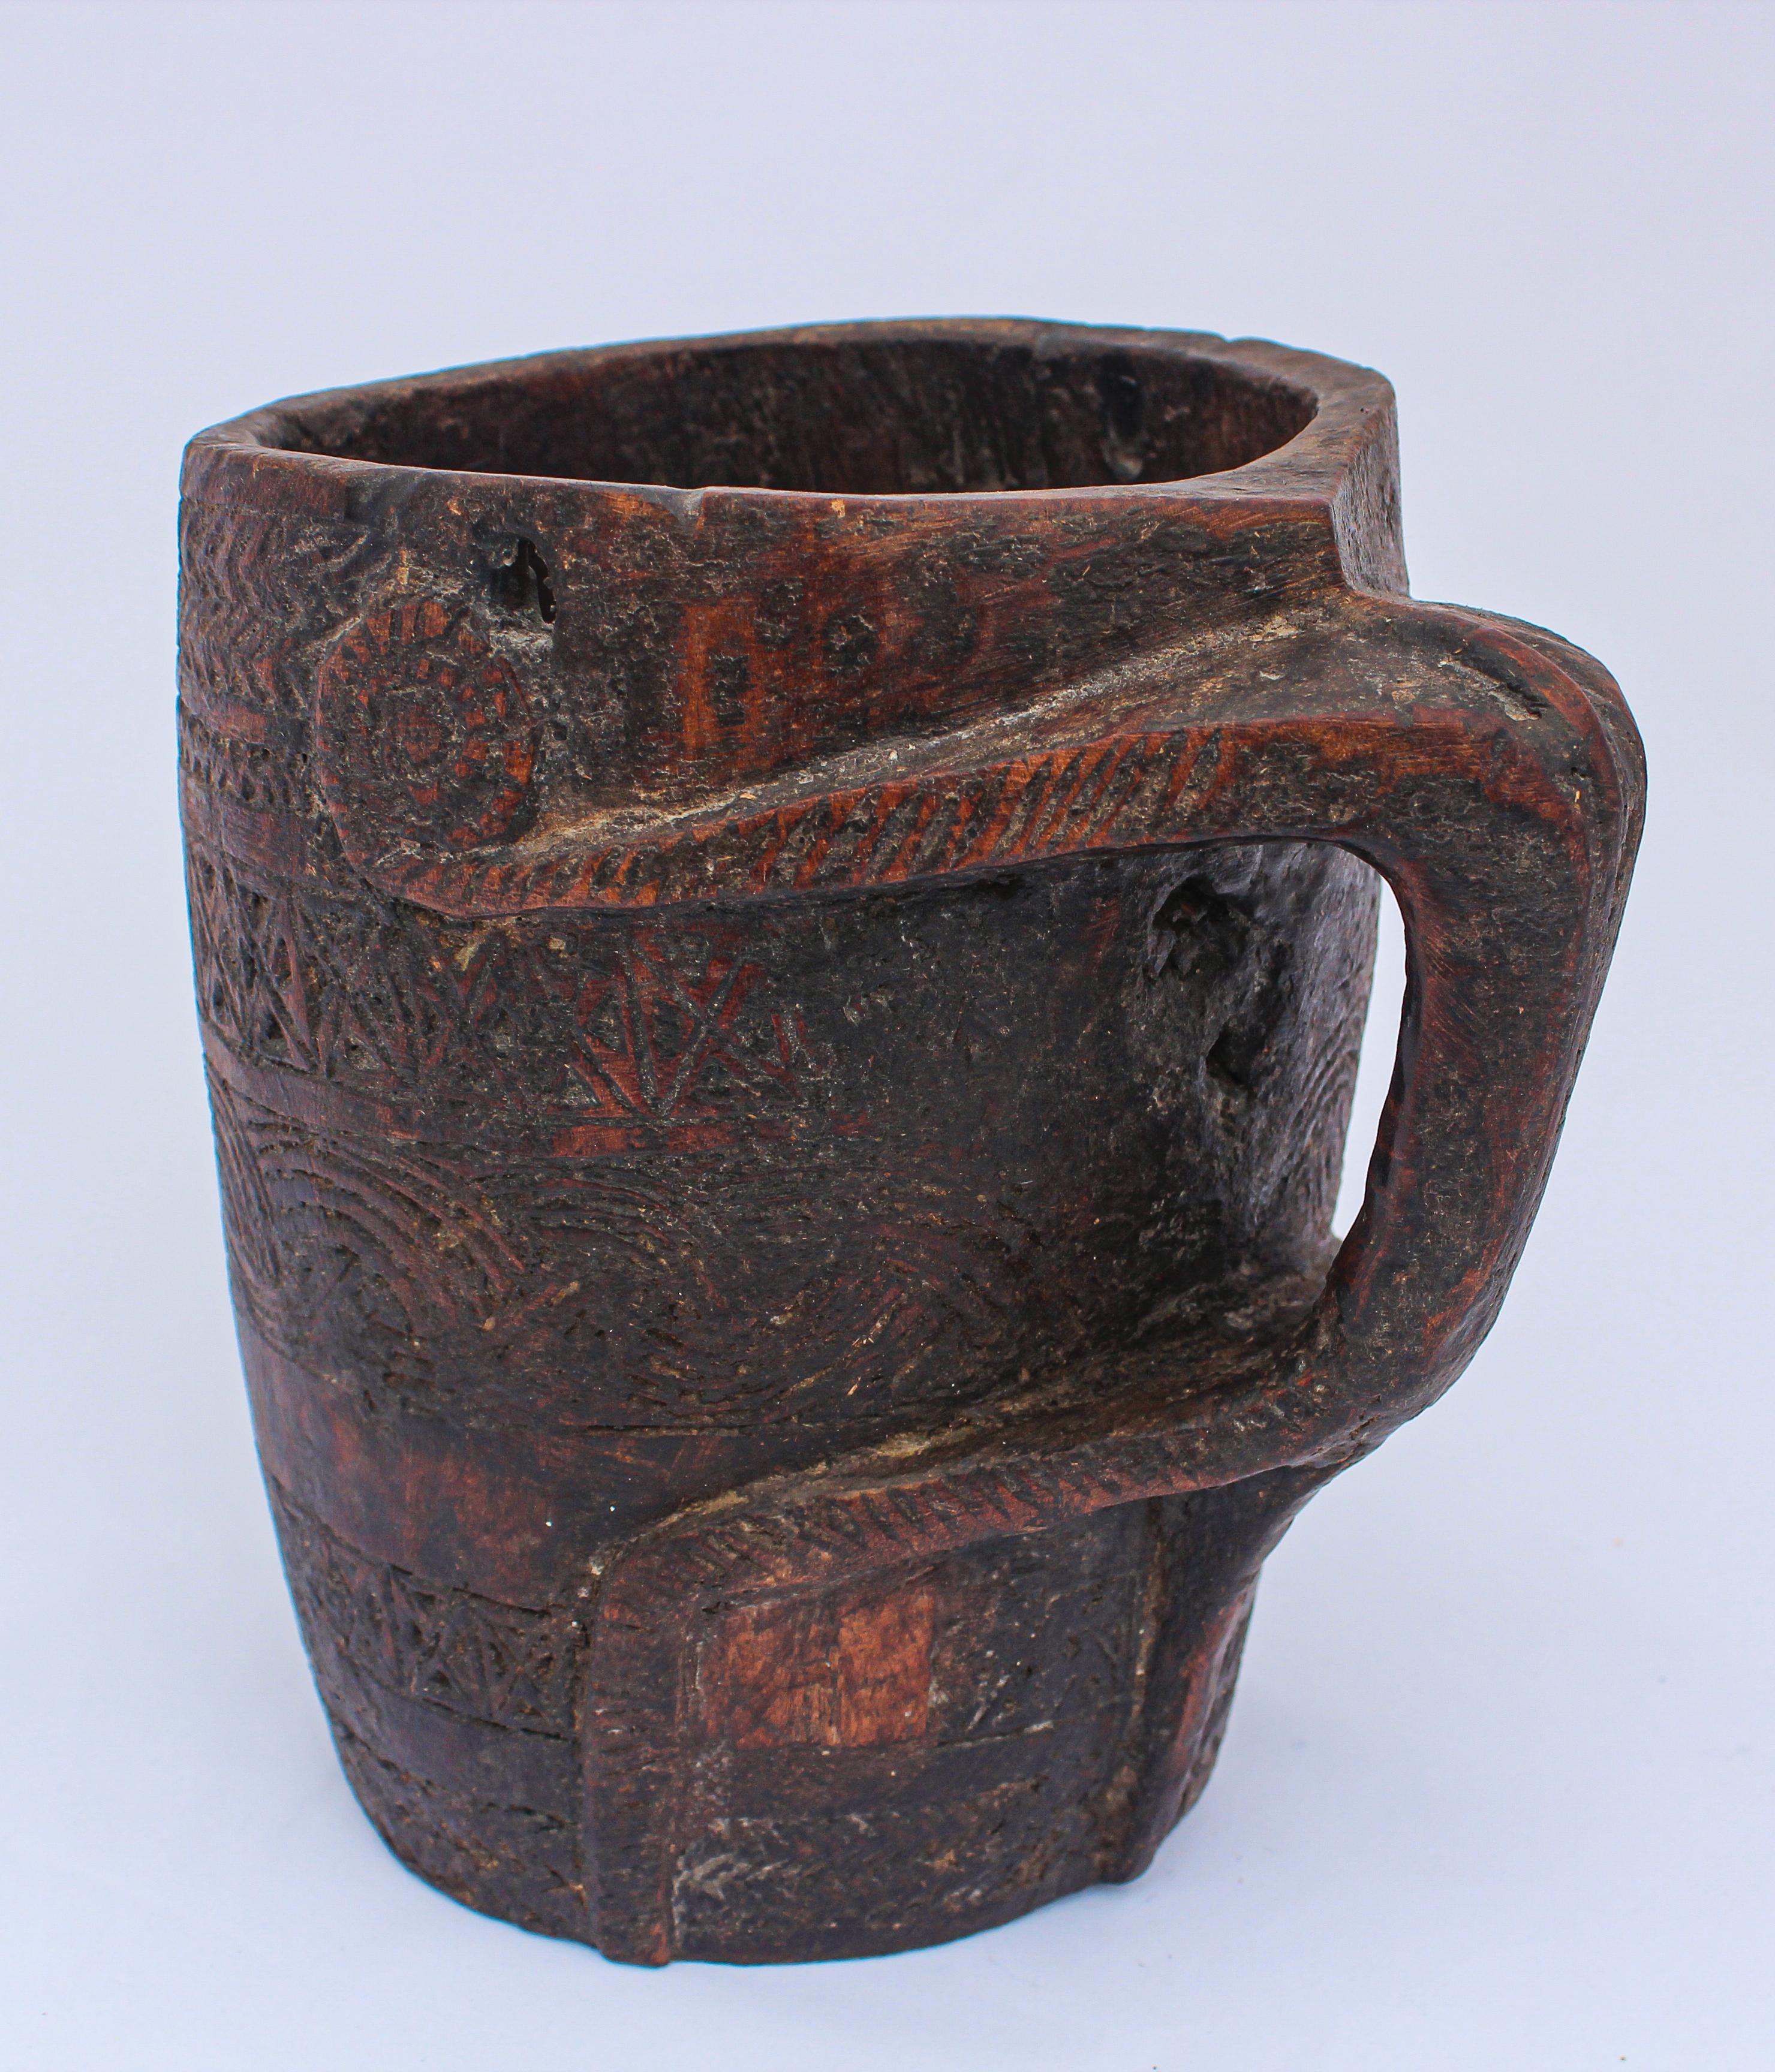 Large hand carved tribal wooden beaker Nepalese milk pot with handle.
Early 20th century antique tribal milk pot with incised pattern.
This rustic milk pot was hand carved of local hardwood in the middle hills of western Nepal, using very basic